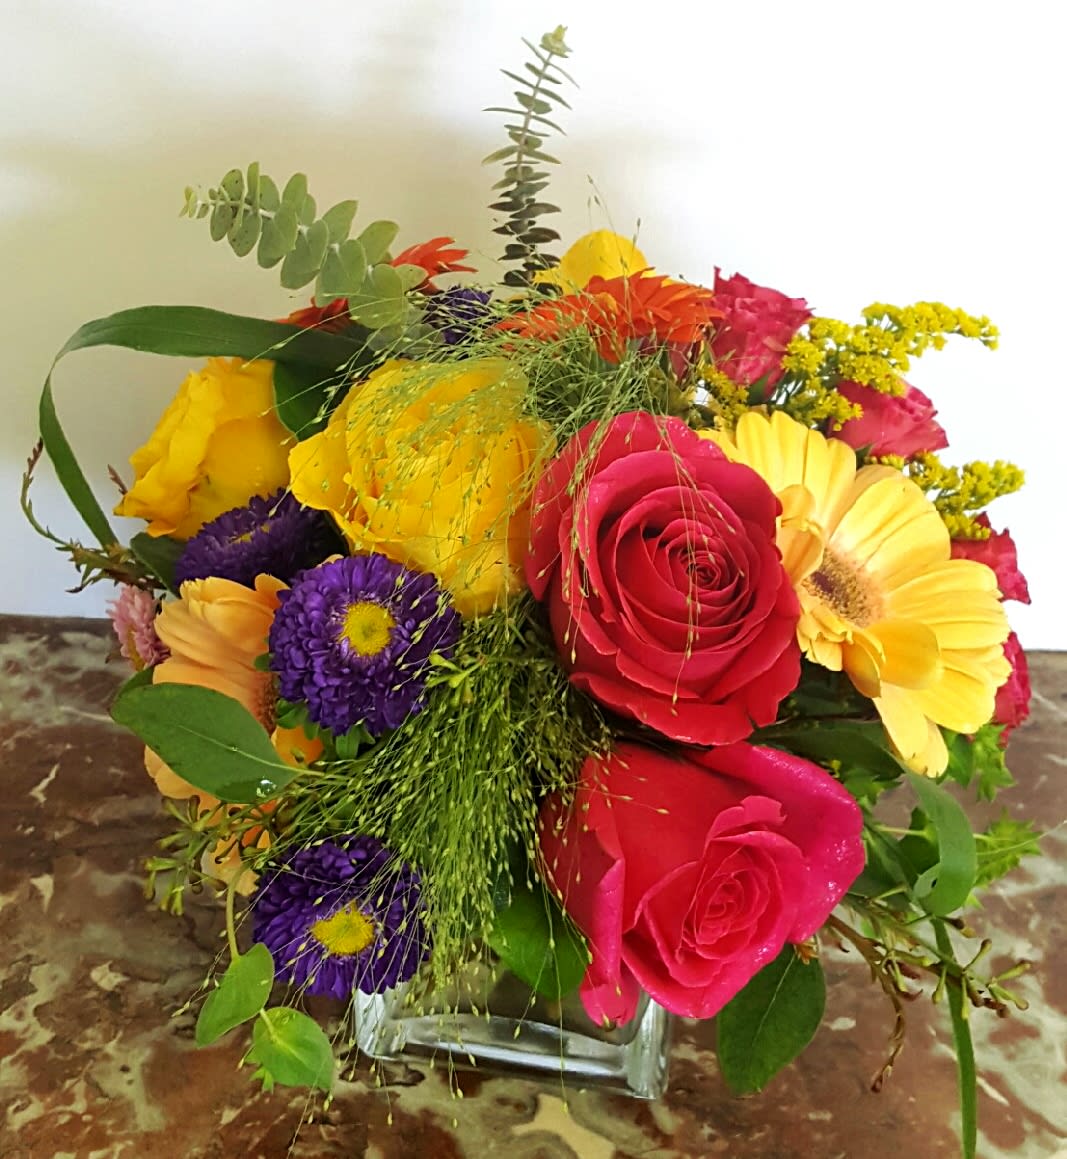 Spring Explosion  - What a way to bring in the spring season!  Pink and yellow Roses brighten this beautiful bouquet filled with mulit-colored Gerbera Daisies, Matsumoto Asters, Cushions and multi-colored Spray Roses or similar flowers accented with Explosion Grass and Spiral Eucalyptus or similar foliage.